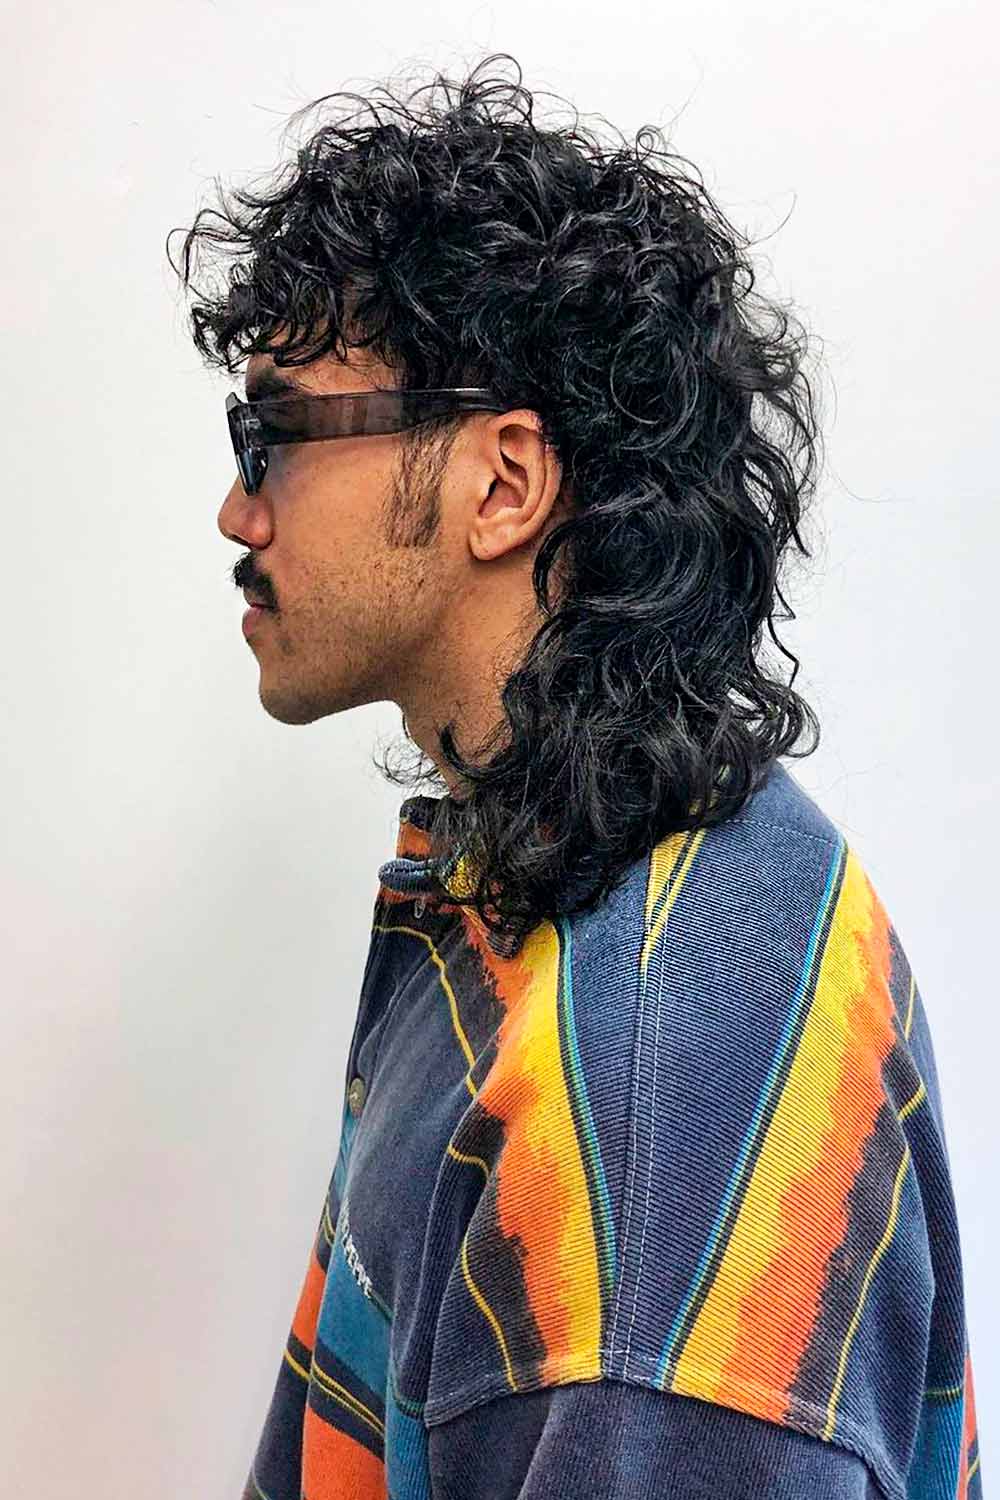 Wolf Cut On Curly Hair For Men #wolfcutmen #wolfhairstylemen #wolfhaircut